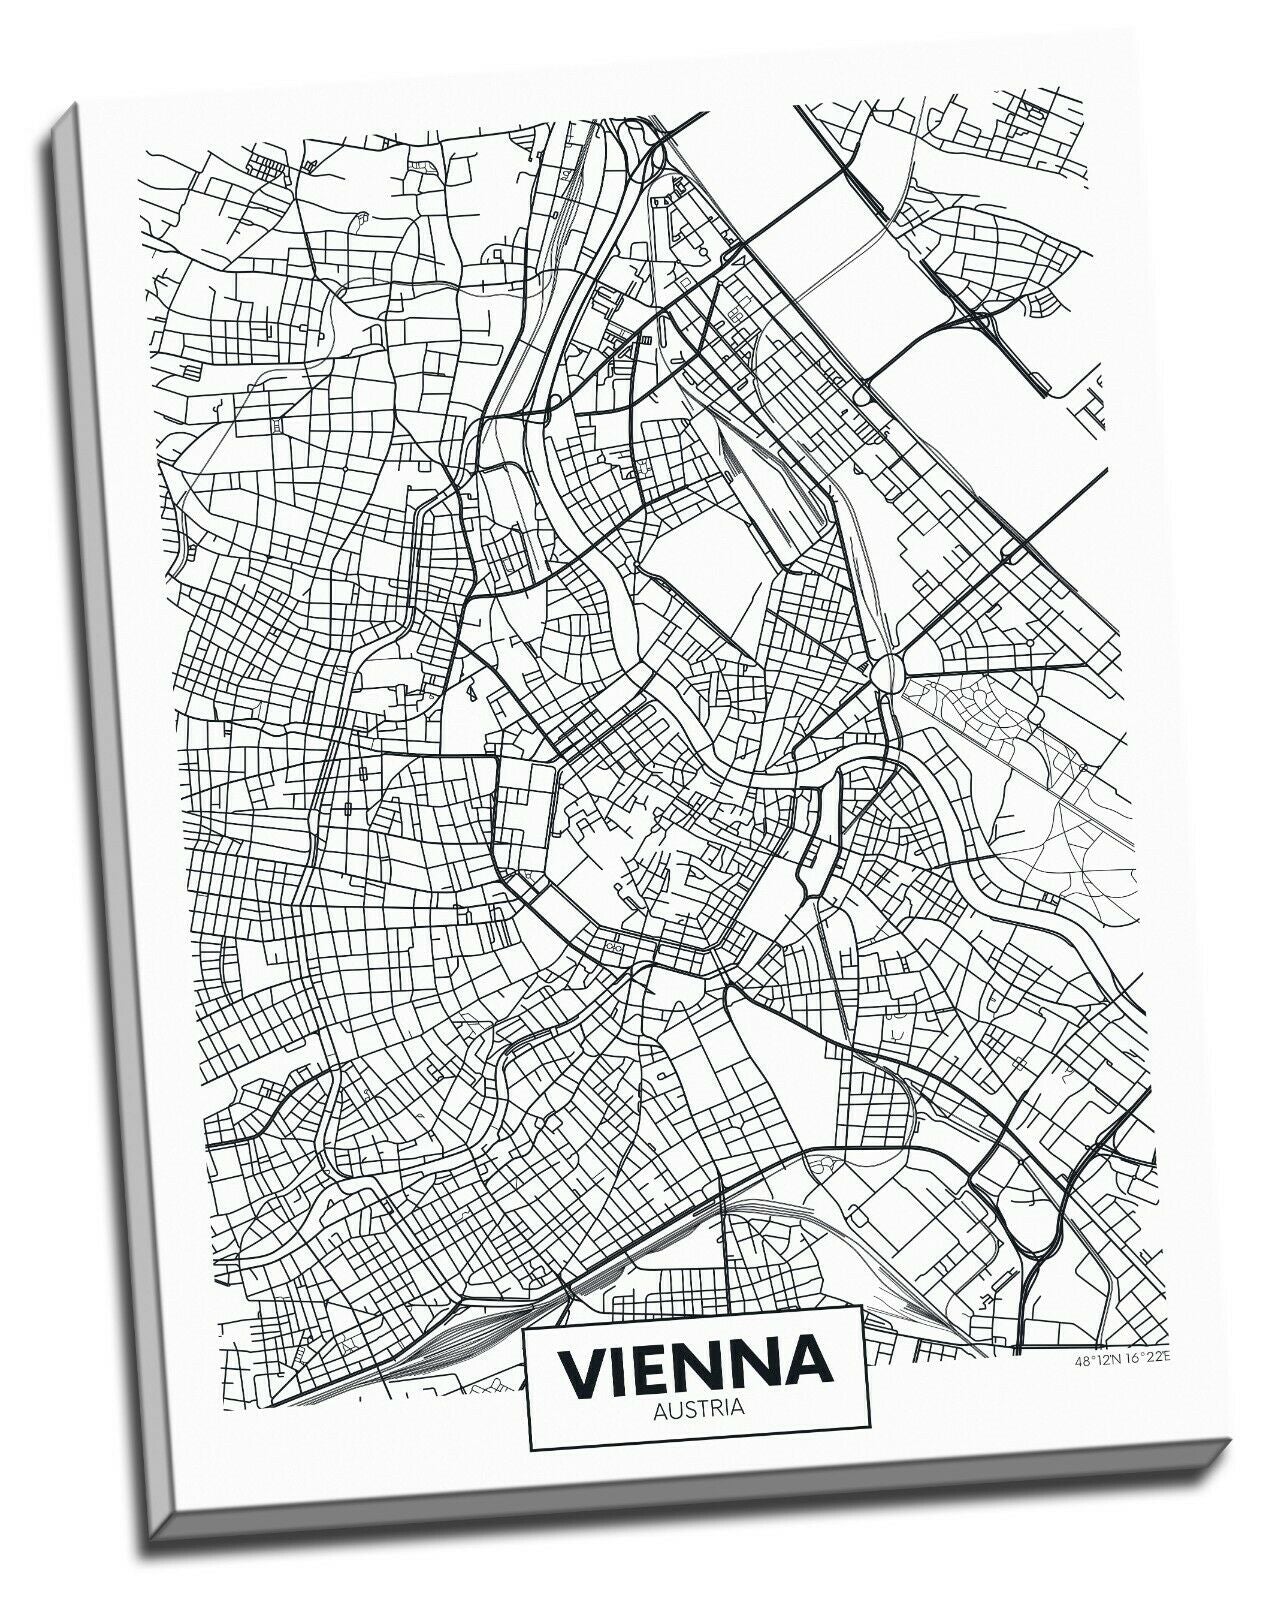 Famous City Line drawing Stretched Canvas Prints Wall Art Home Office Decor